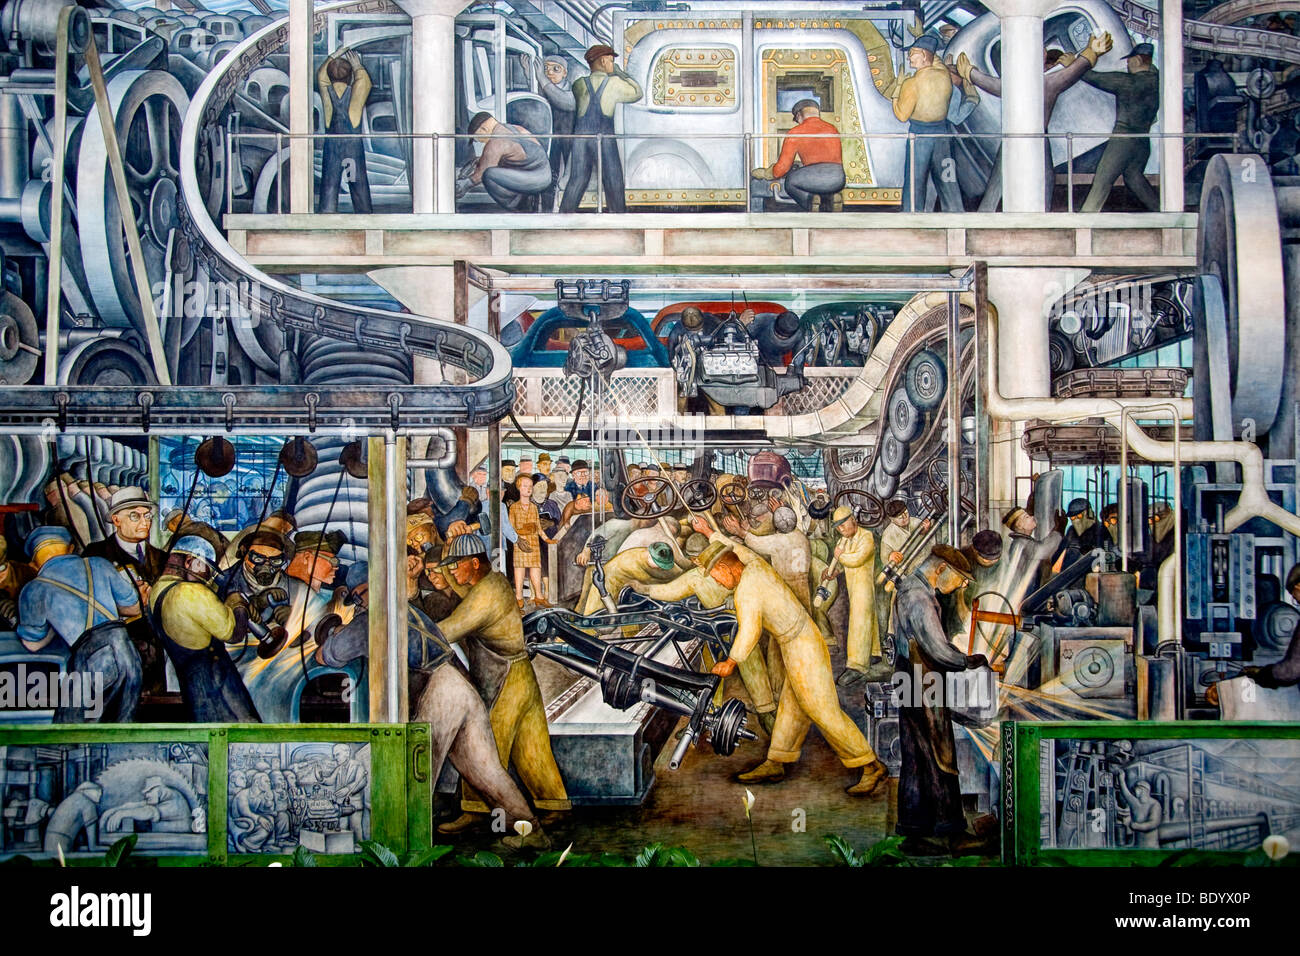 Ford River Rouge factory workmen assemble new cars in a 1933 fresco mural by Diego Rivera at the Detroit Institute of Art Stock Photo